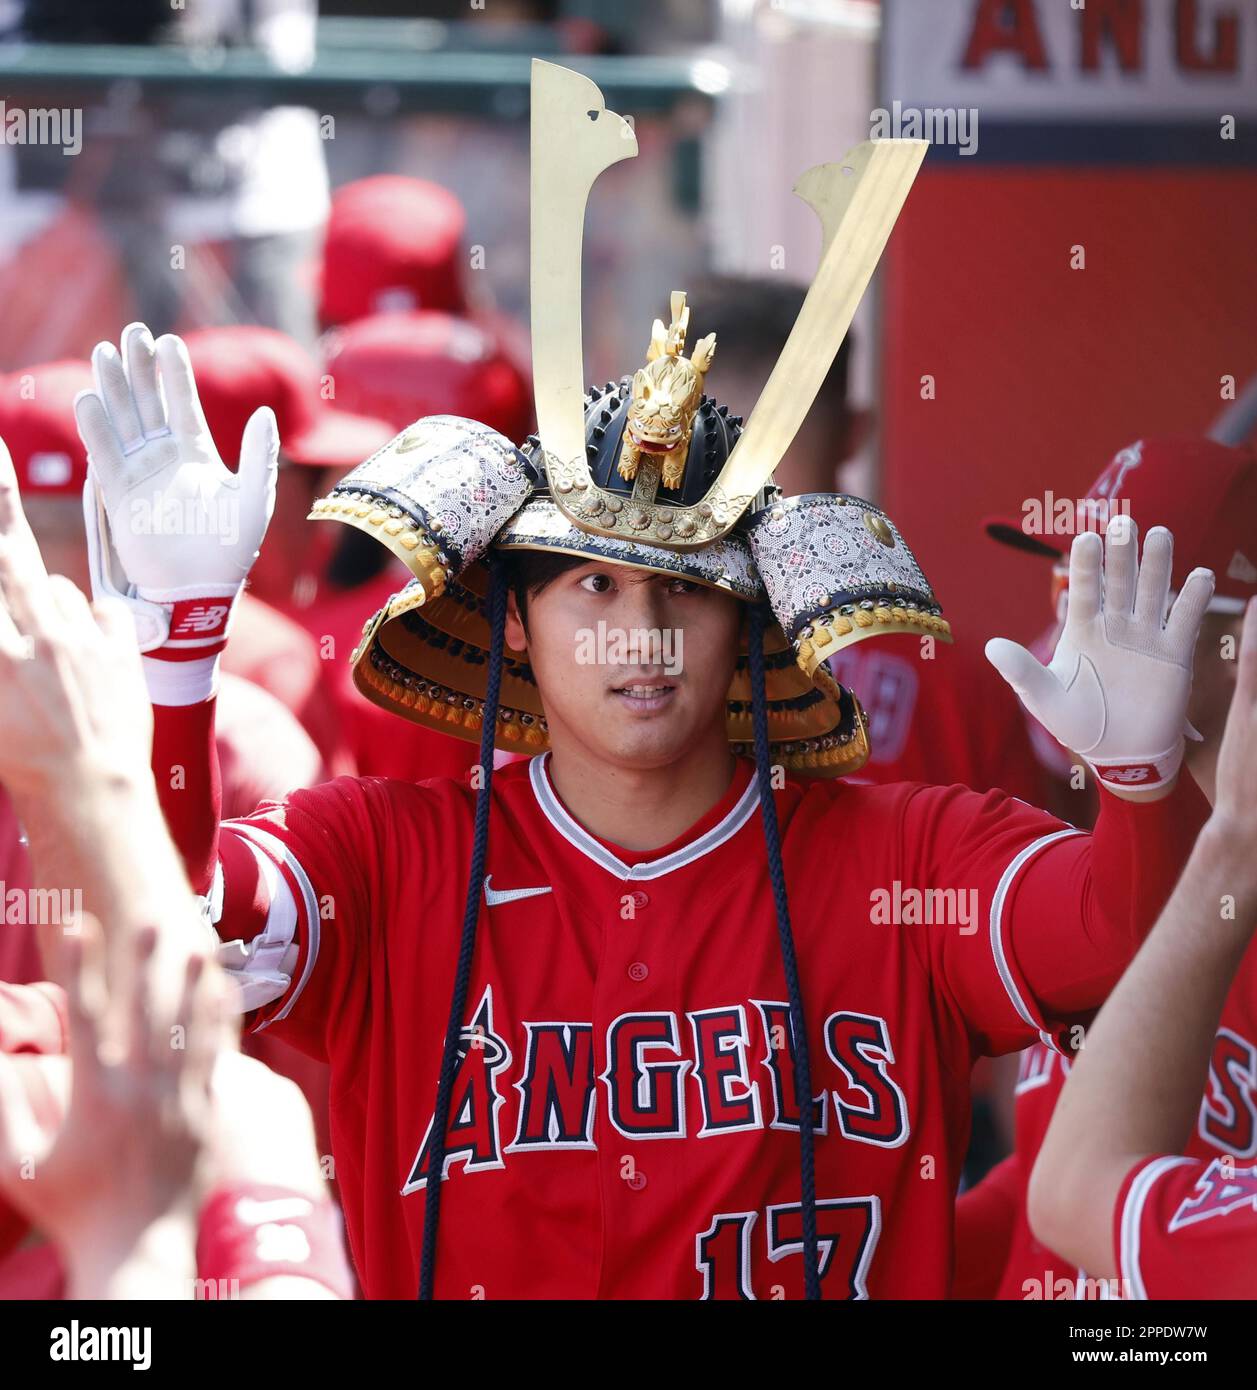 Shohei Ohtani of the Los Angeles Angels celebrates wearing a